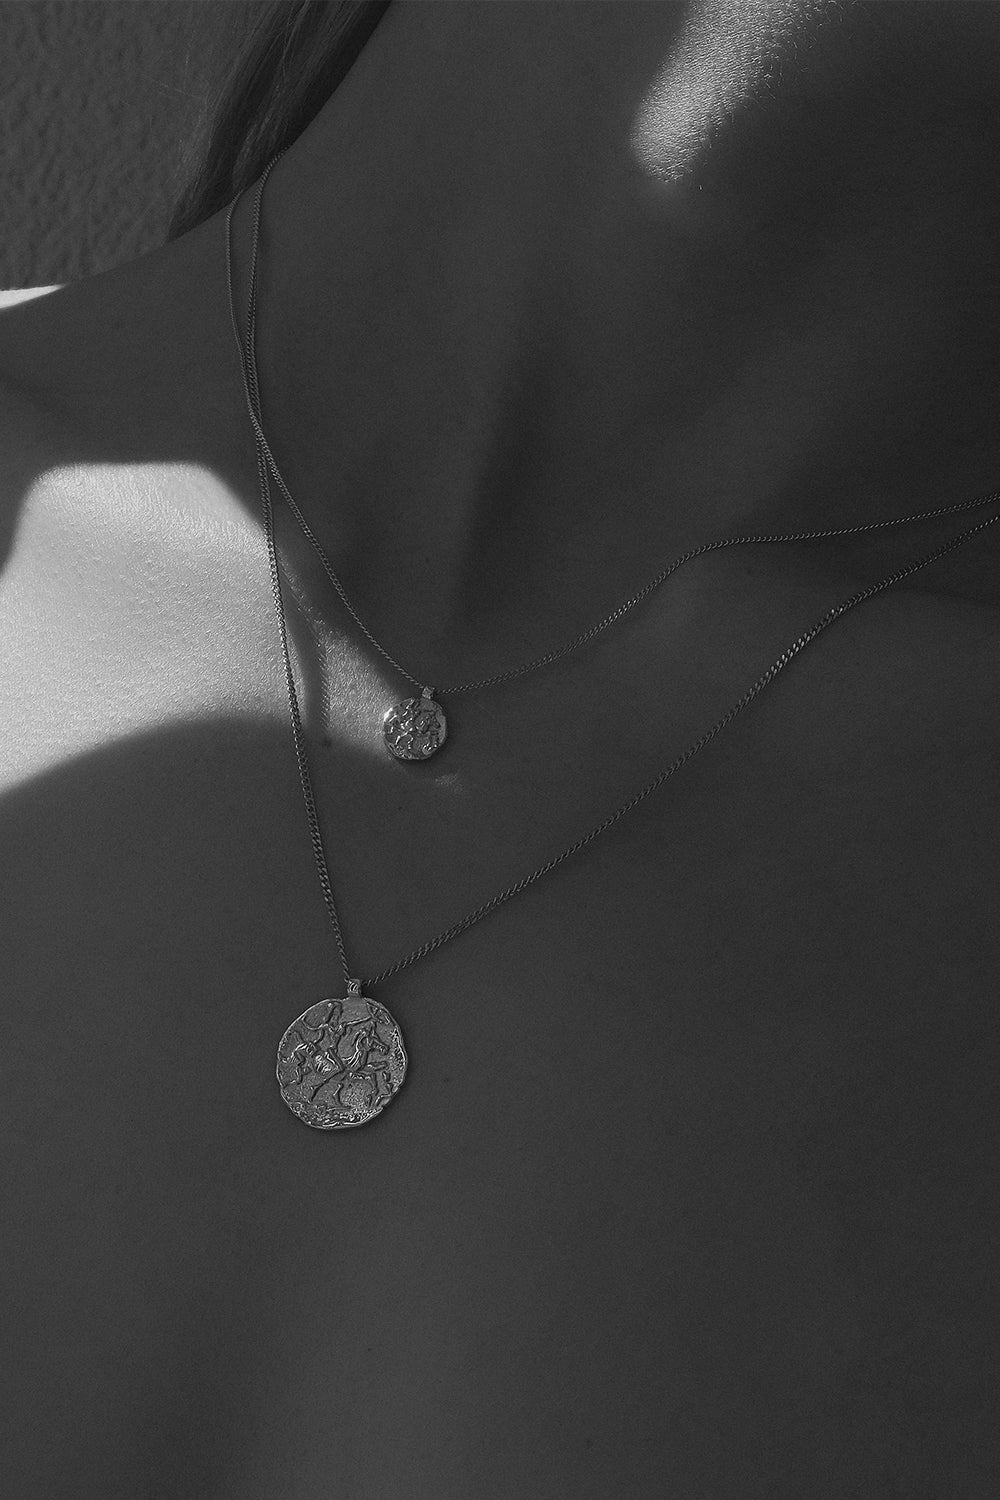 Mini Coin Necklace | Silver or 9K White Gold